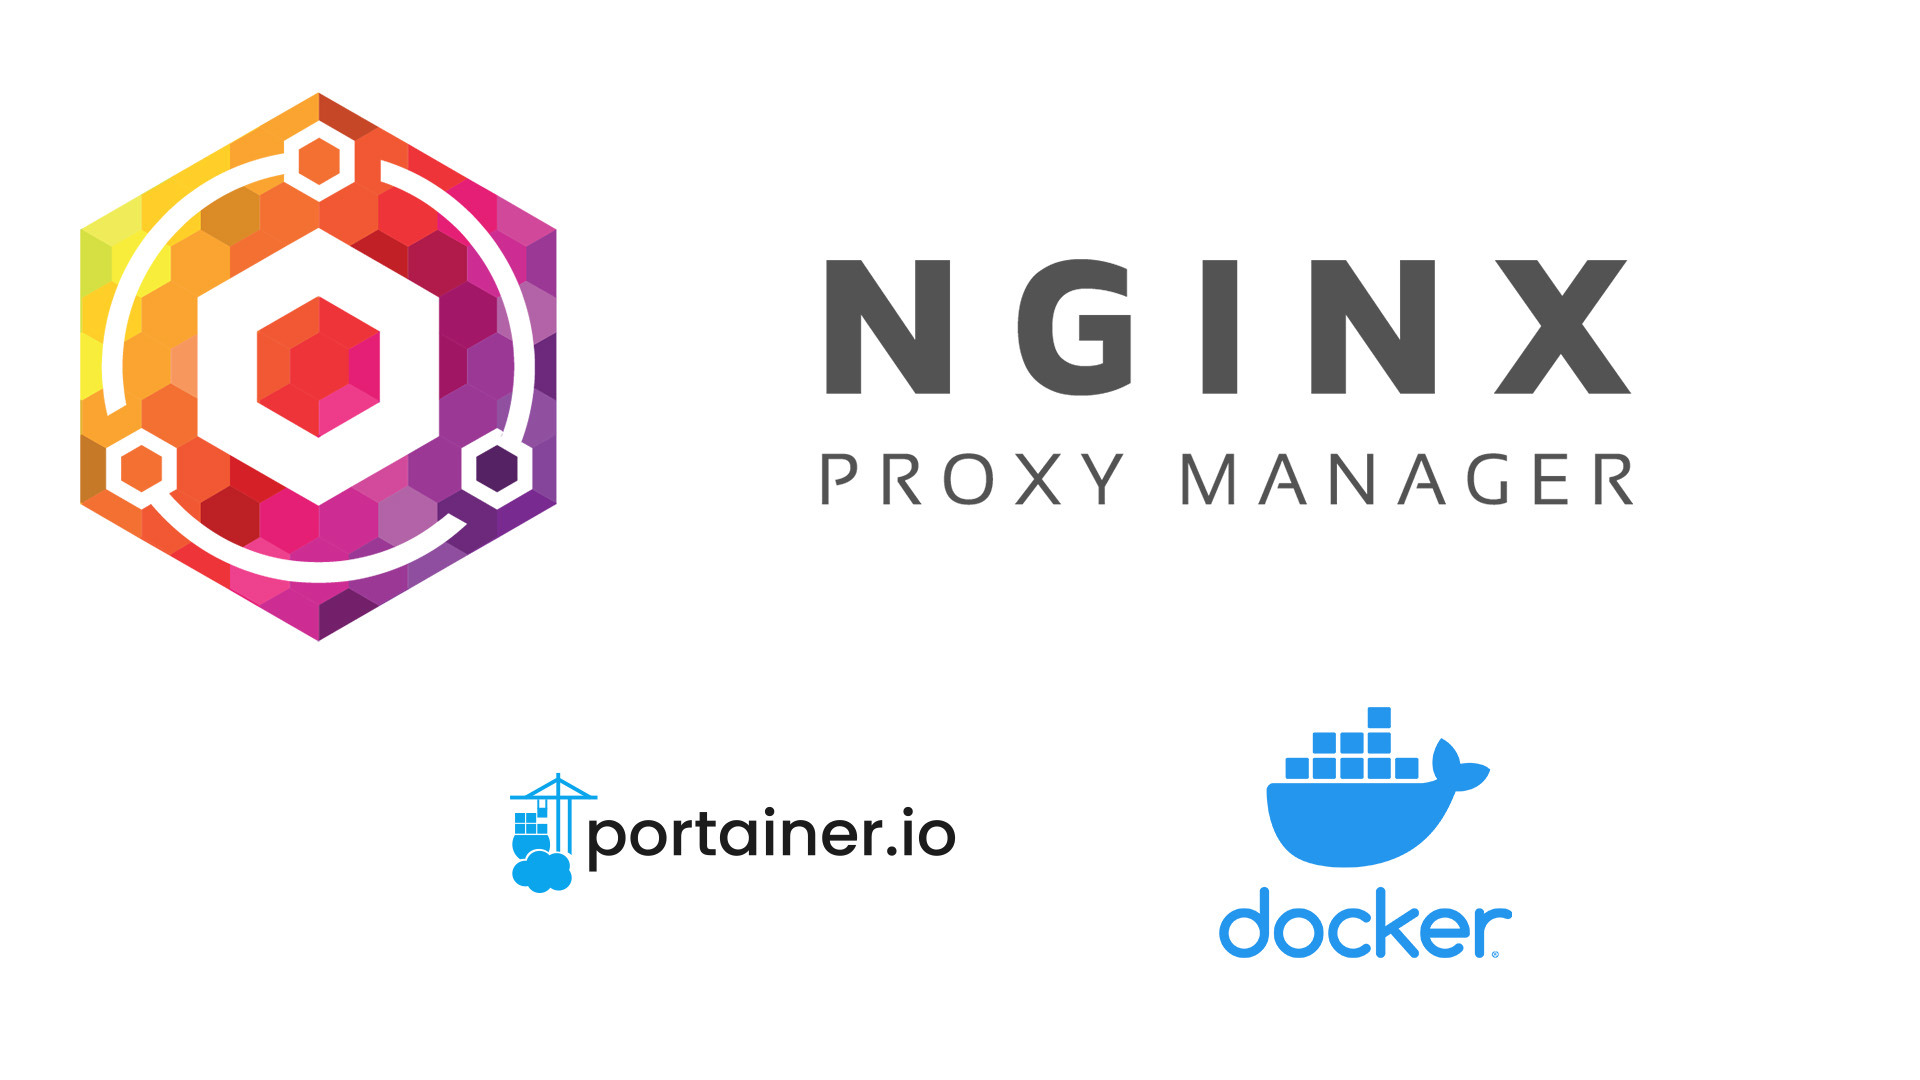 You are currently viewing Nginx Proxy Manager Einrichtung unter Portainer